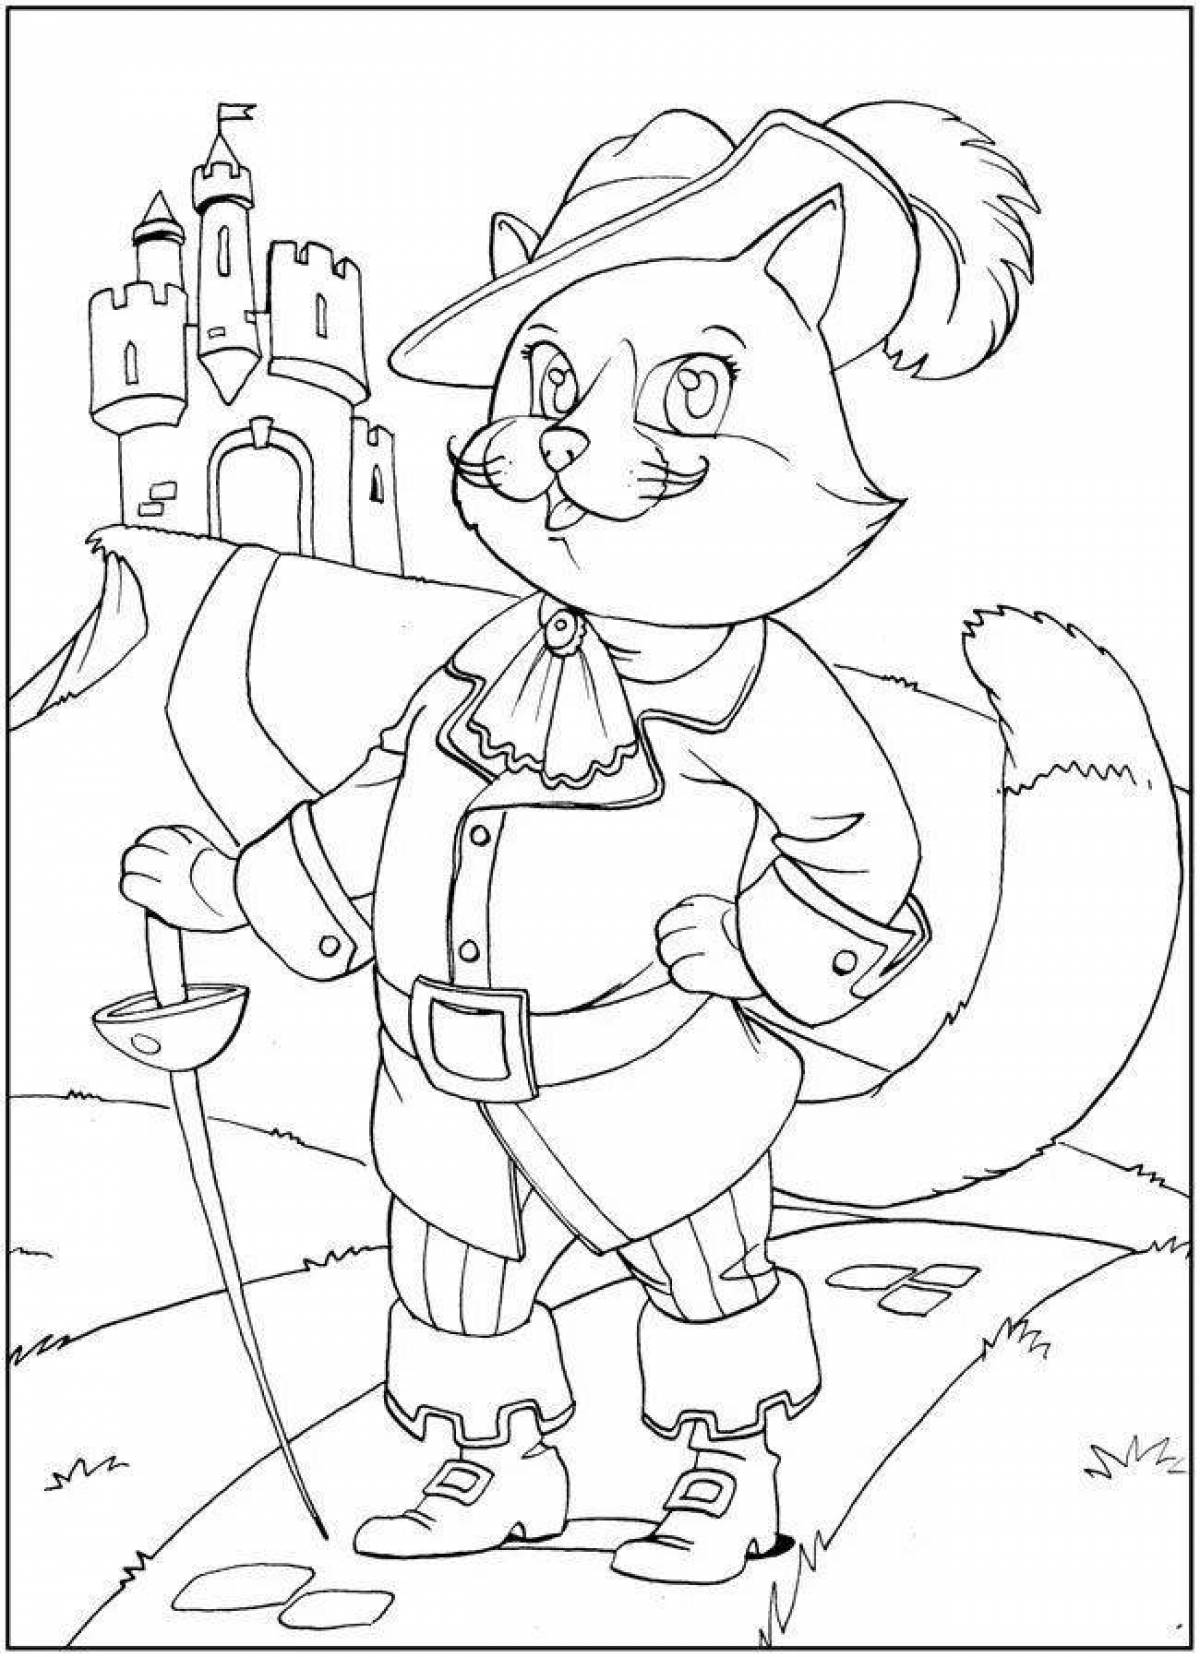 Coloring book with taste from perrault's tales